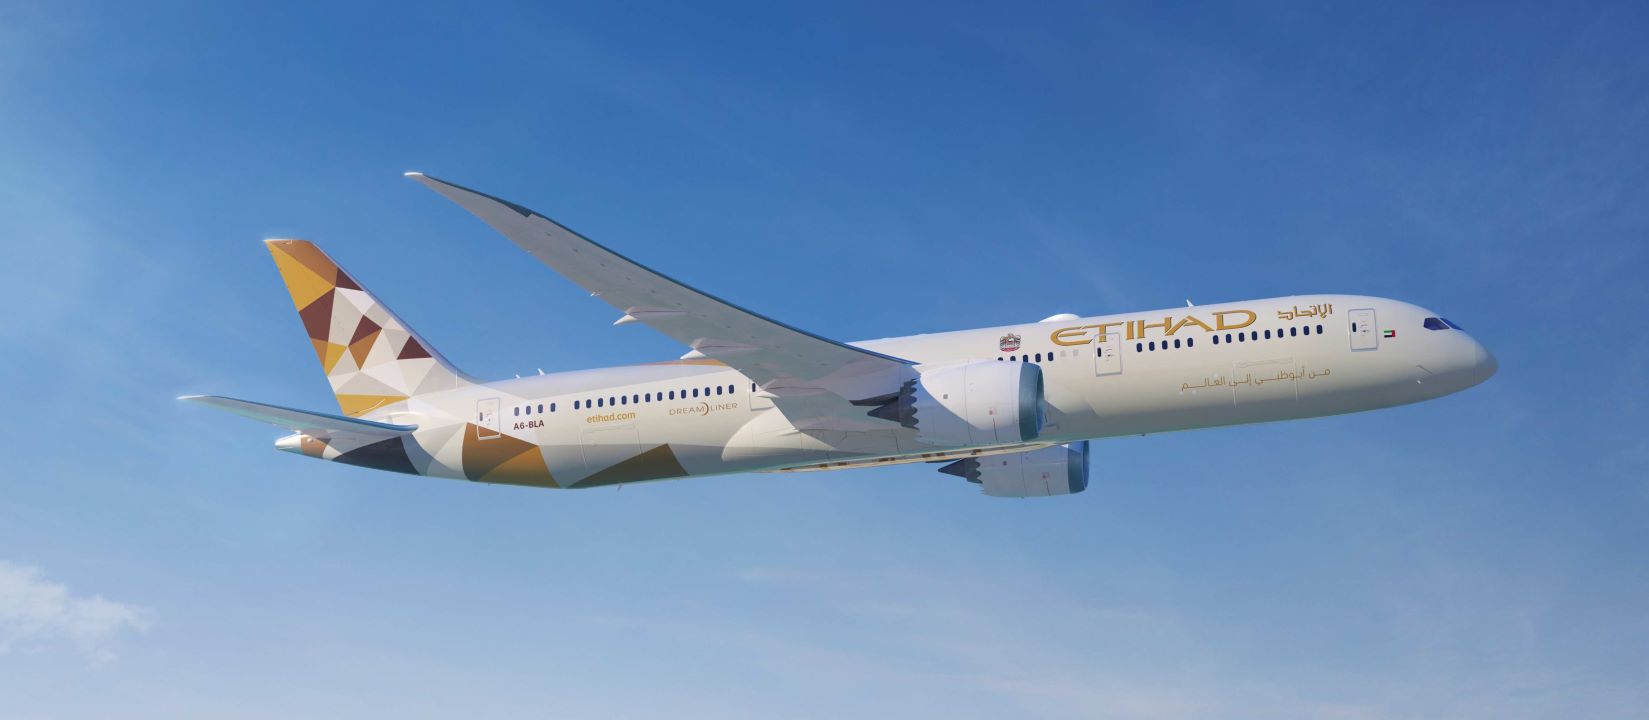 Etihad Guest celebrates the enrollment of its 10 millionth member.